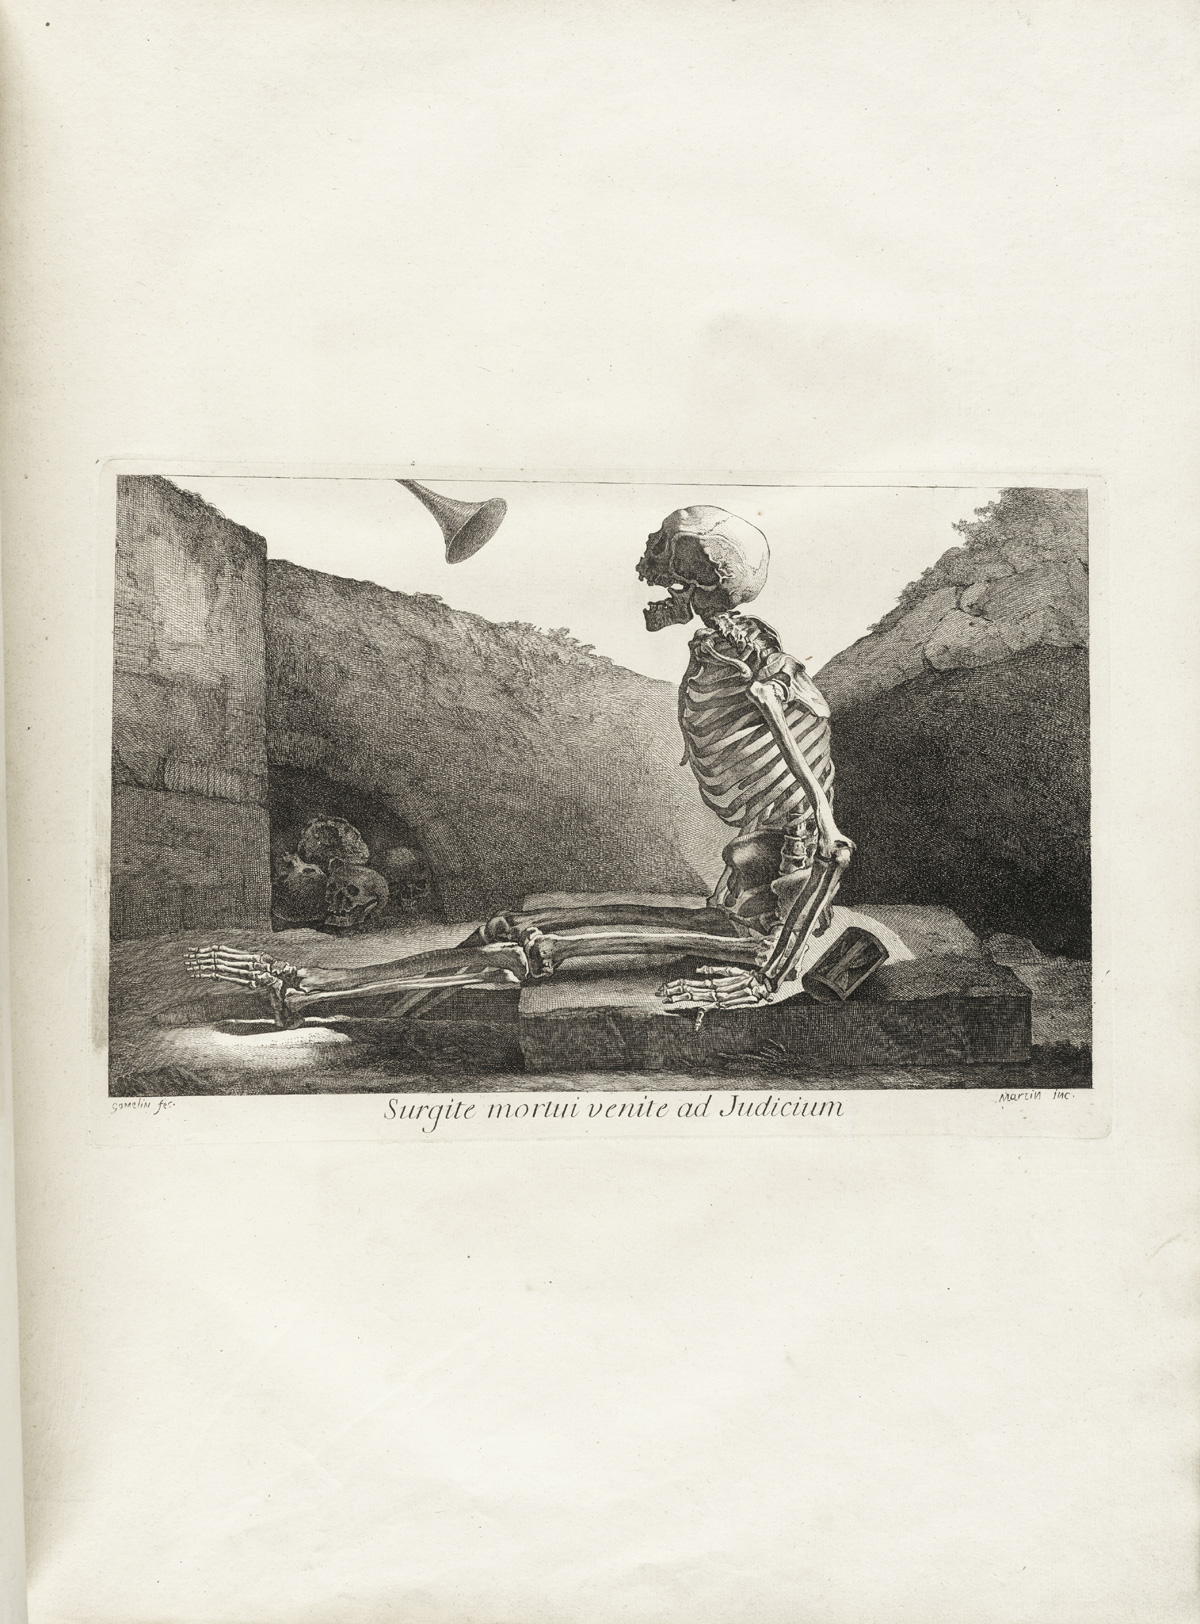 Engraving of a skeleton sitting up in a grave, viewed from the side, looking up to the bell of a horn (Gabriel’s trumpet), from Jacques Gamelin’s Nouveau recueil d’osteologie et de myologie, NLM Call no.: WZ 260 G178m 1779.